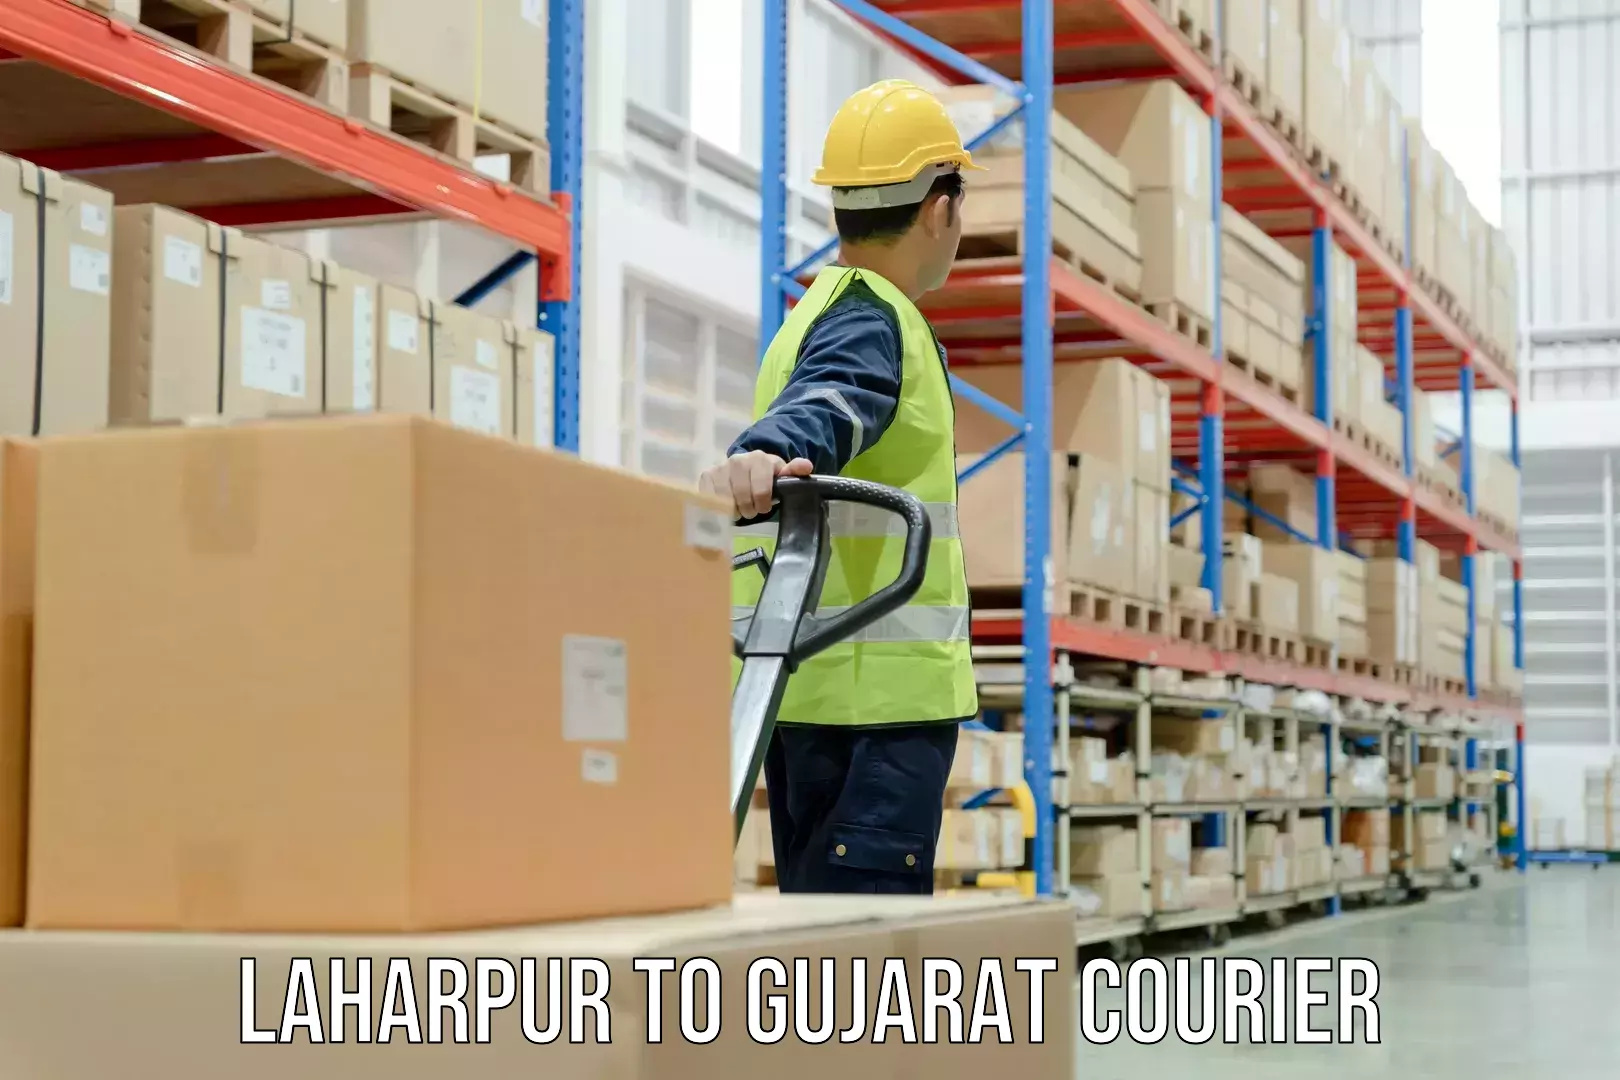 User-friendly delivery service Laharpur to Surat